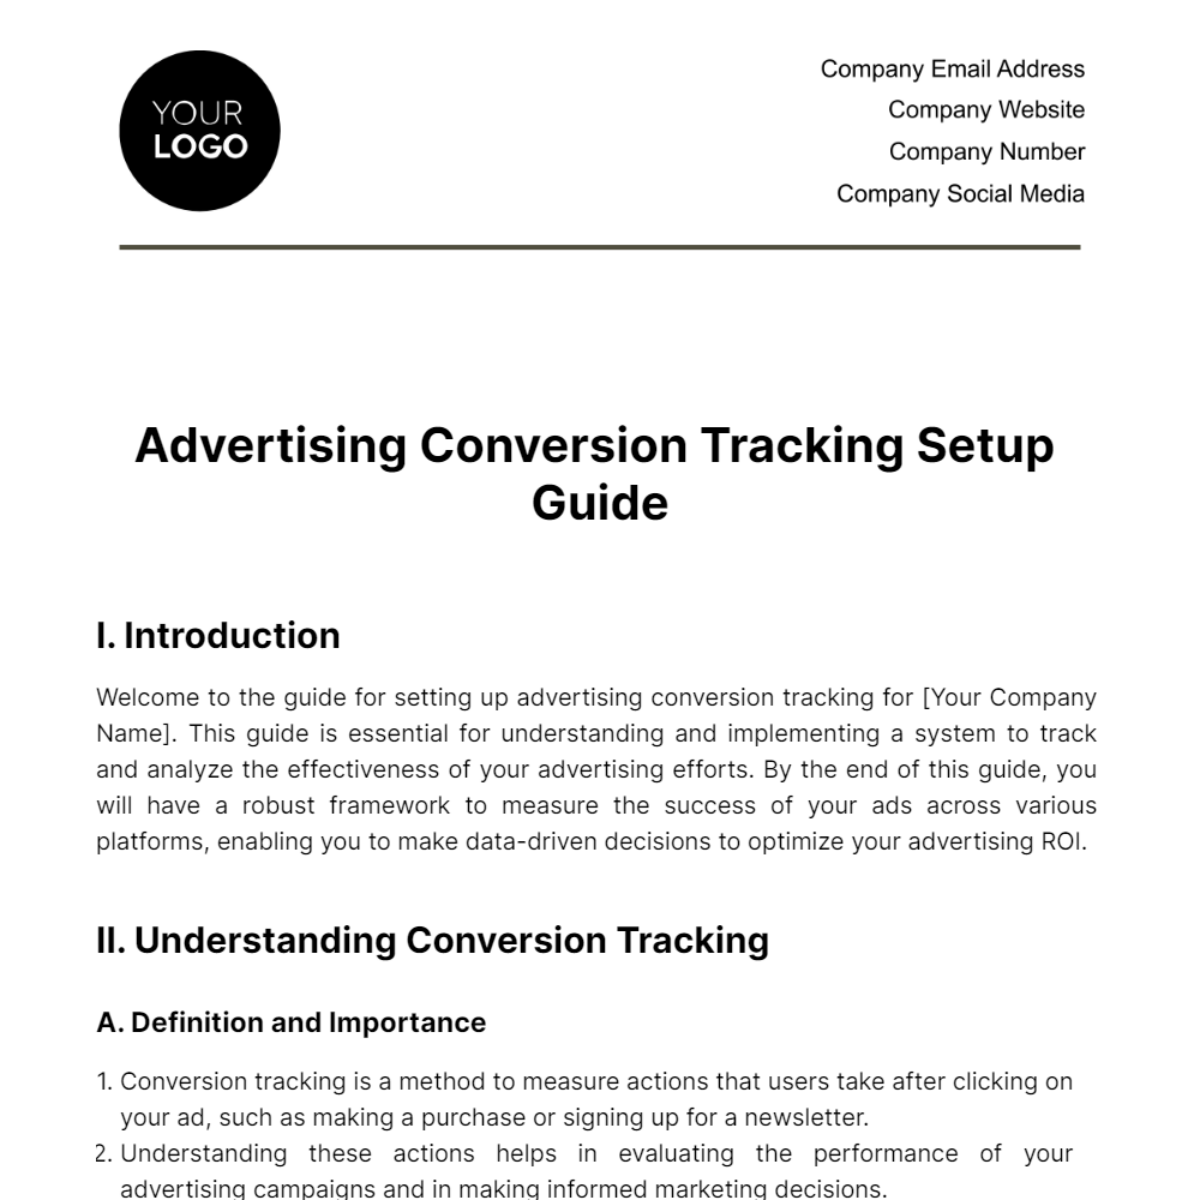 Advertising Conversion Tracking Setup Guide Template